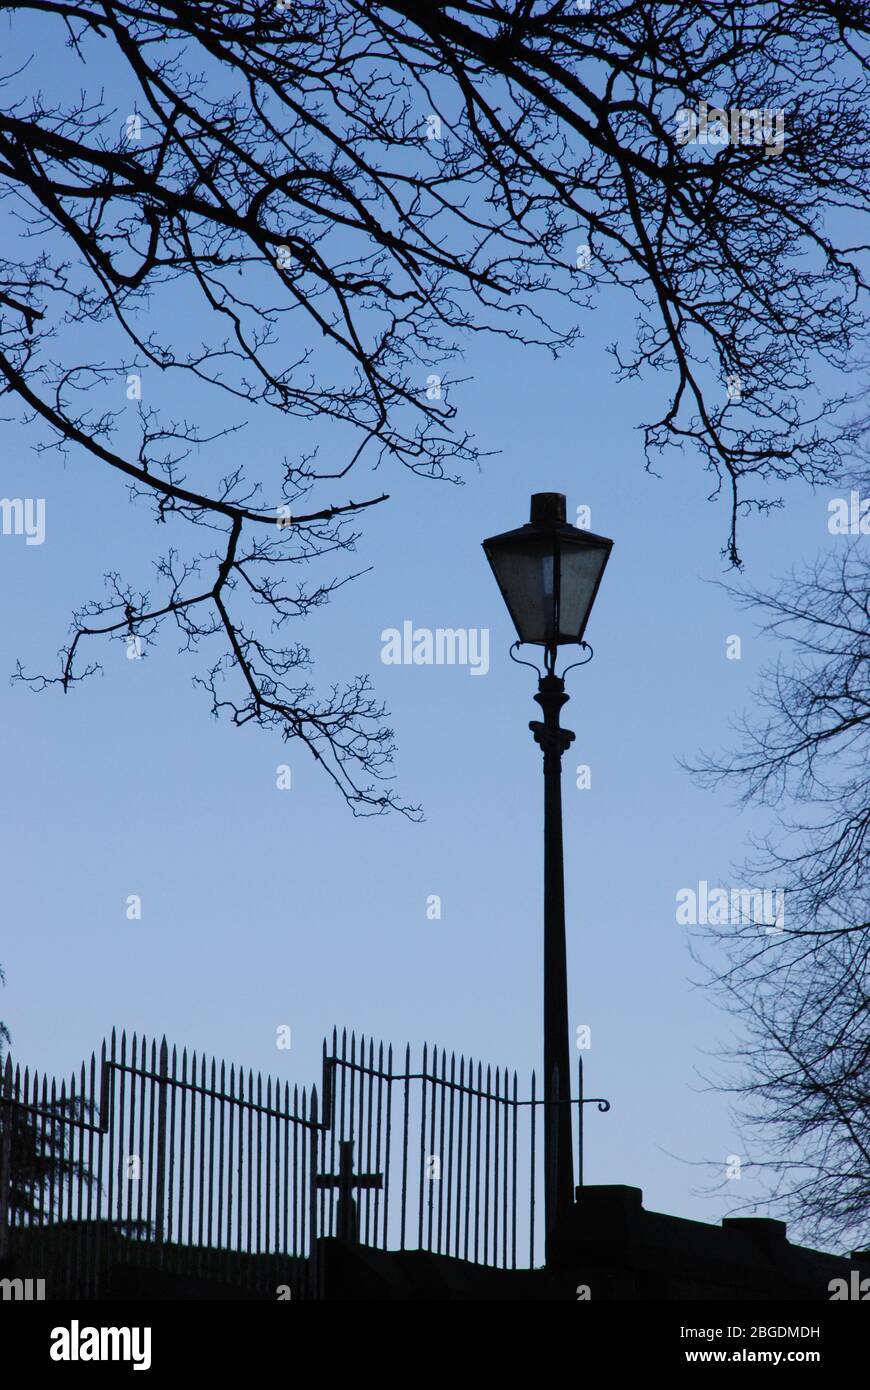 Single street light with wrought iron staggered fence and cross behind along with leafless tree curving around light all in silhouette Stock Photo